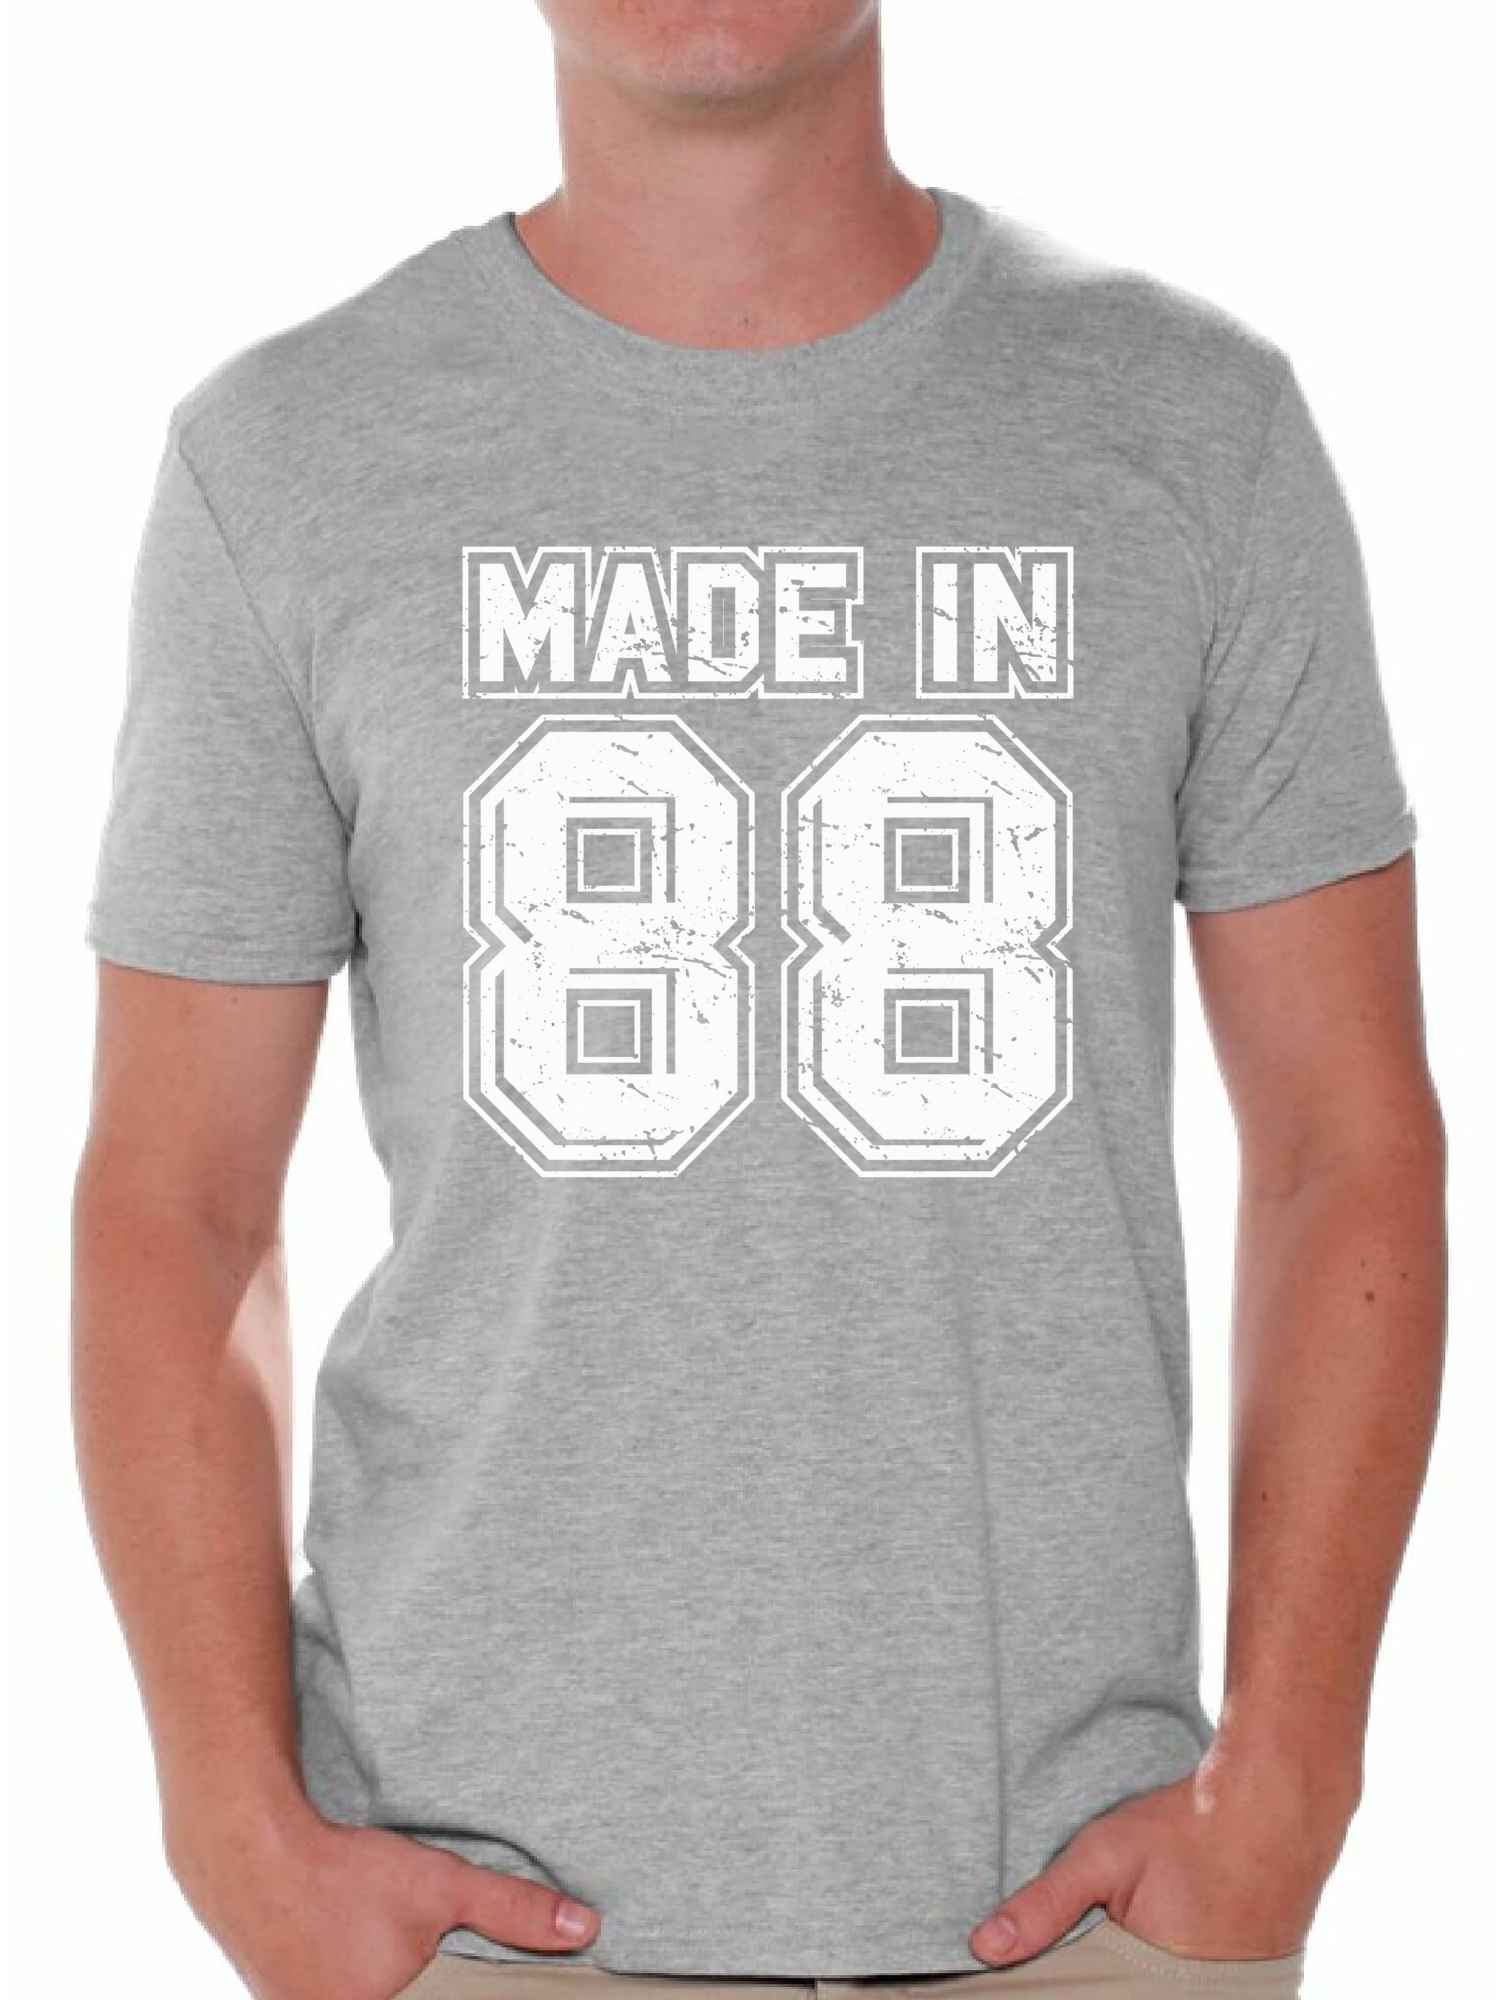 Awkward Styles Made In 88 Tshirt 30th Birthday Party Outfit for Men Born in 1988 Funny Birthday Shirts for Men 30th Birthday Shirt Funny Thirty Shirts Mens 30th Tshirt B-Day Party for Men 88 Shirt - image 1 of 4